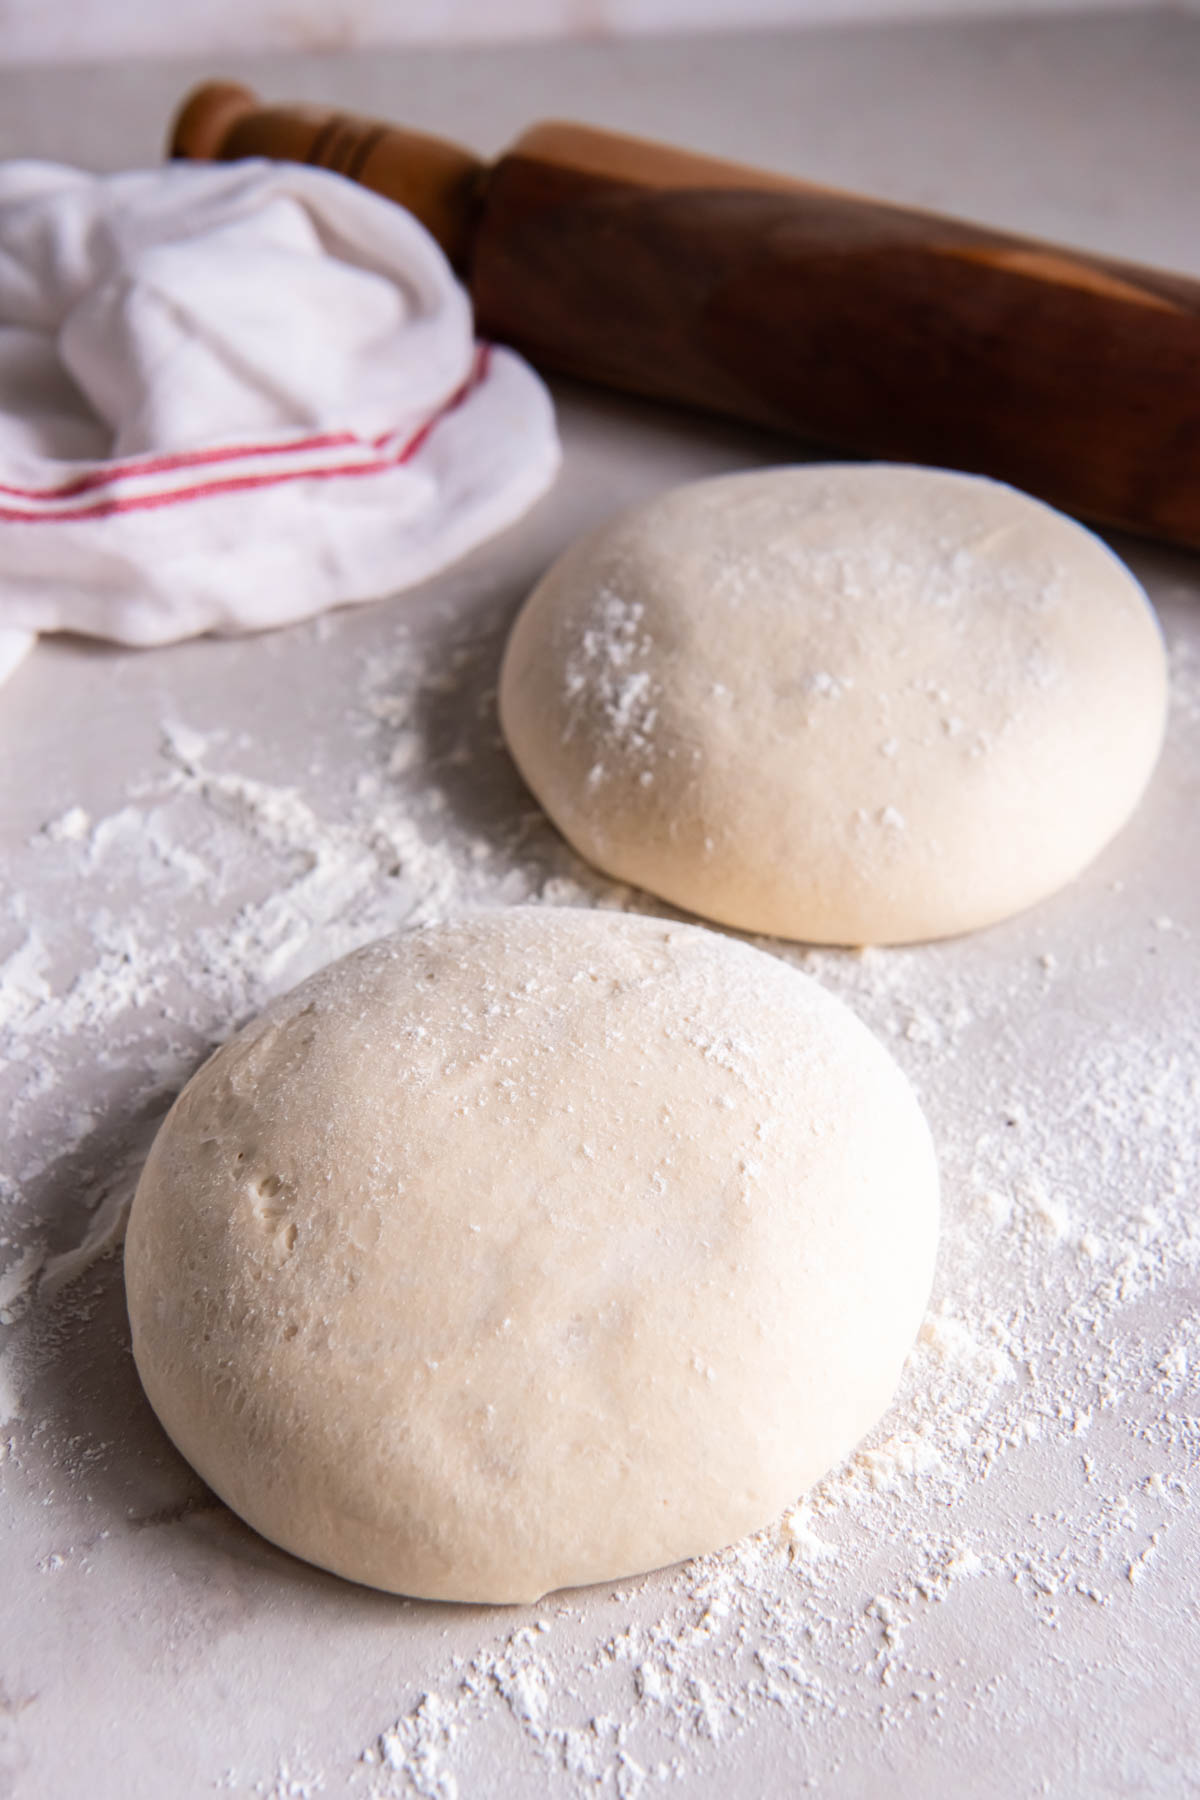 Two balls of pizza dough after rising on floured work surface.